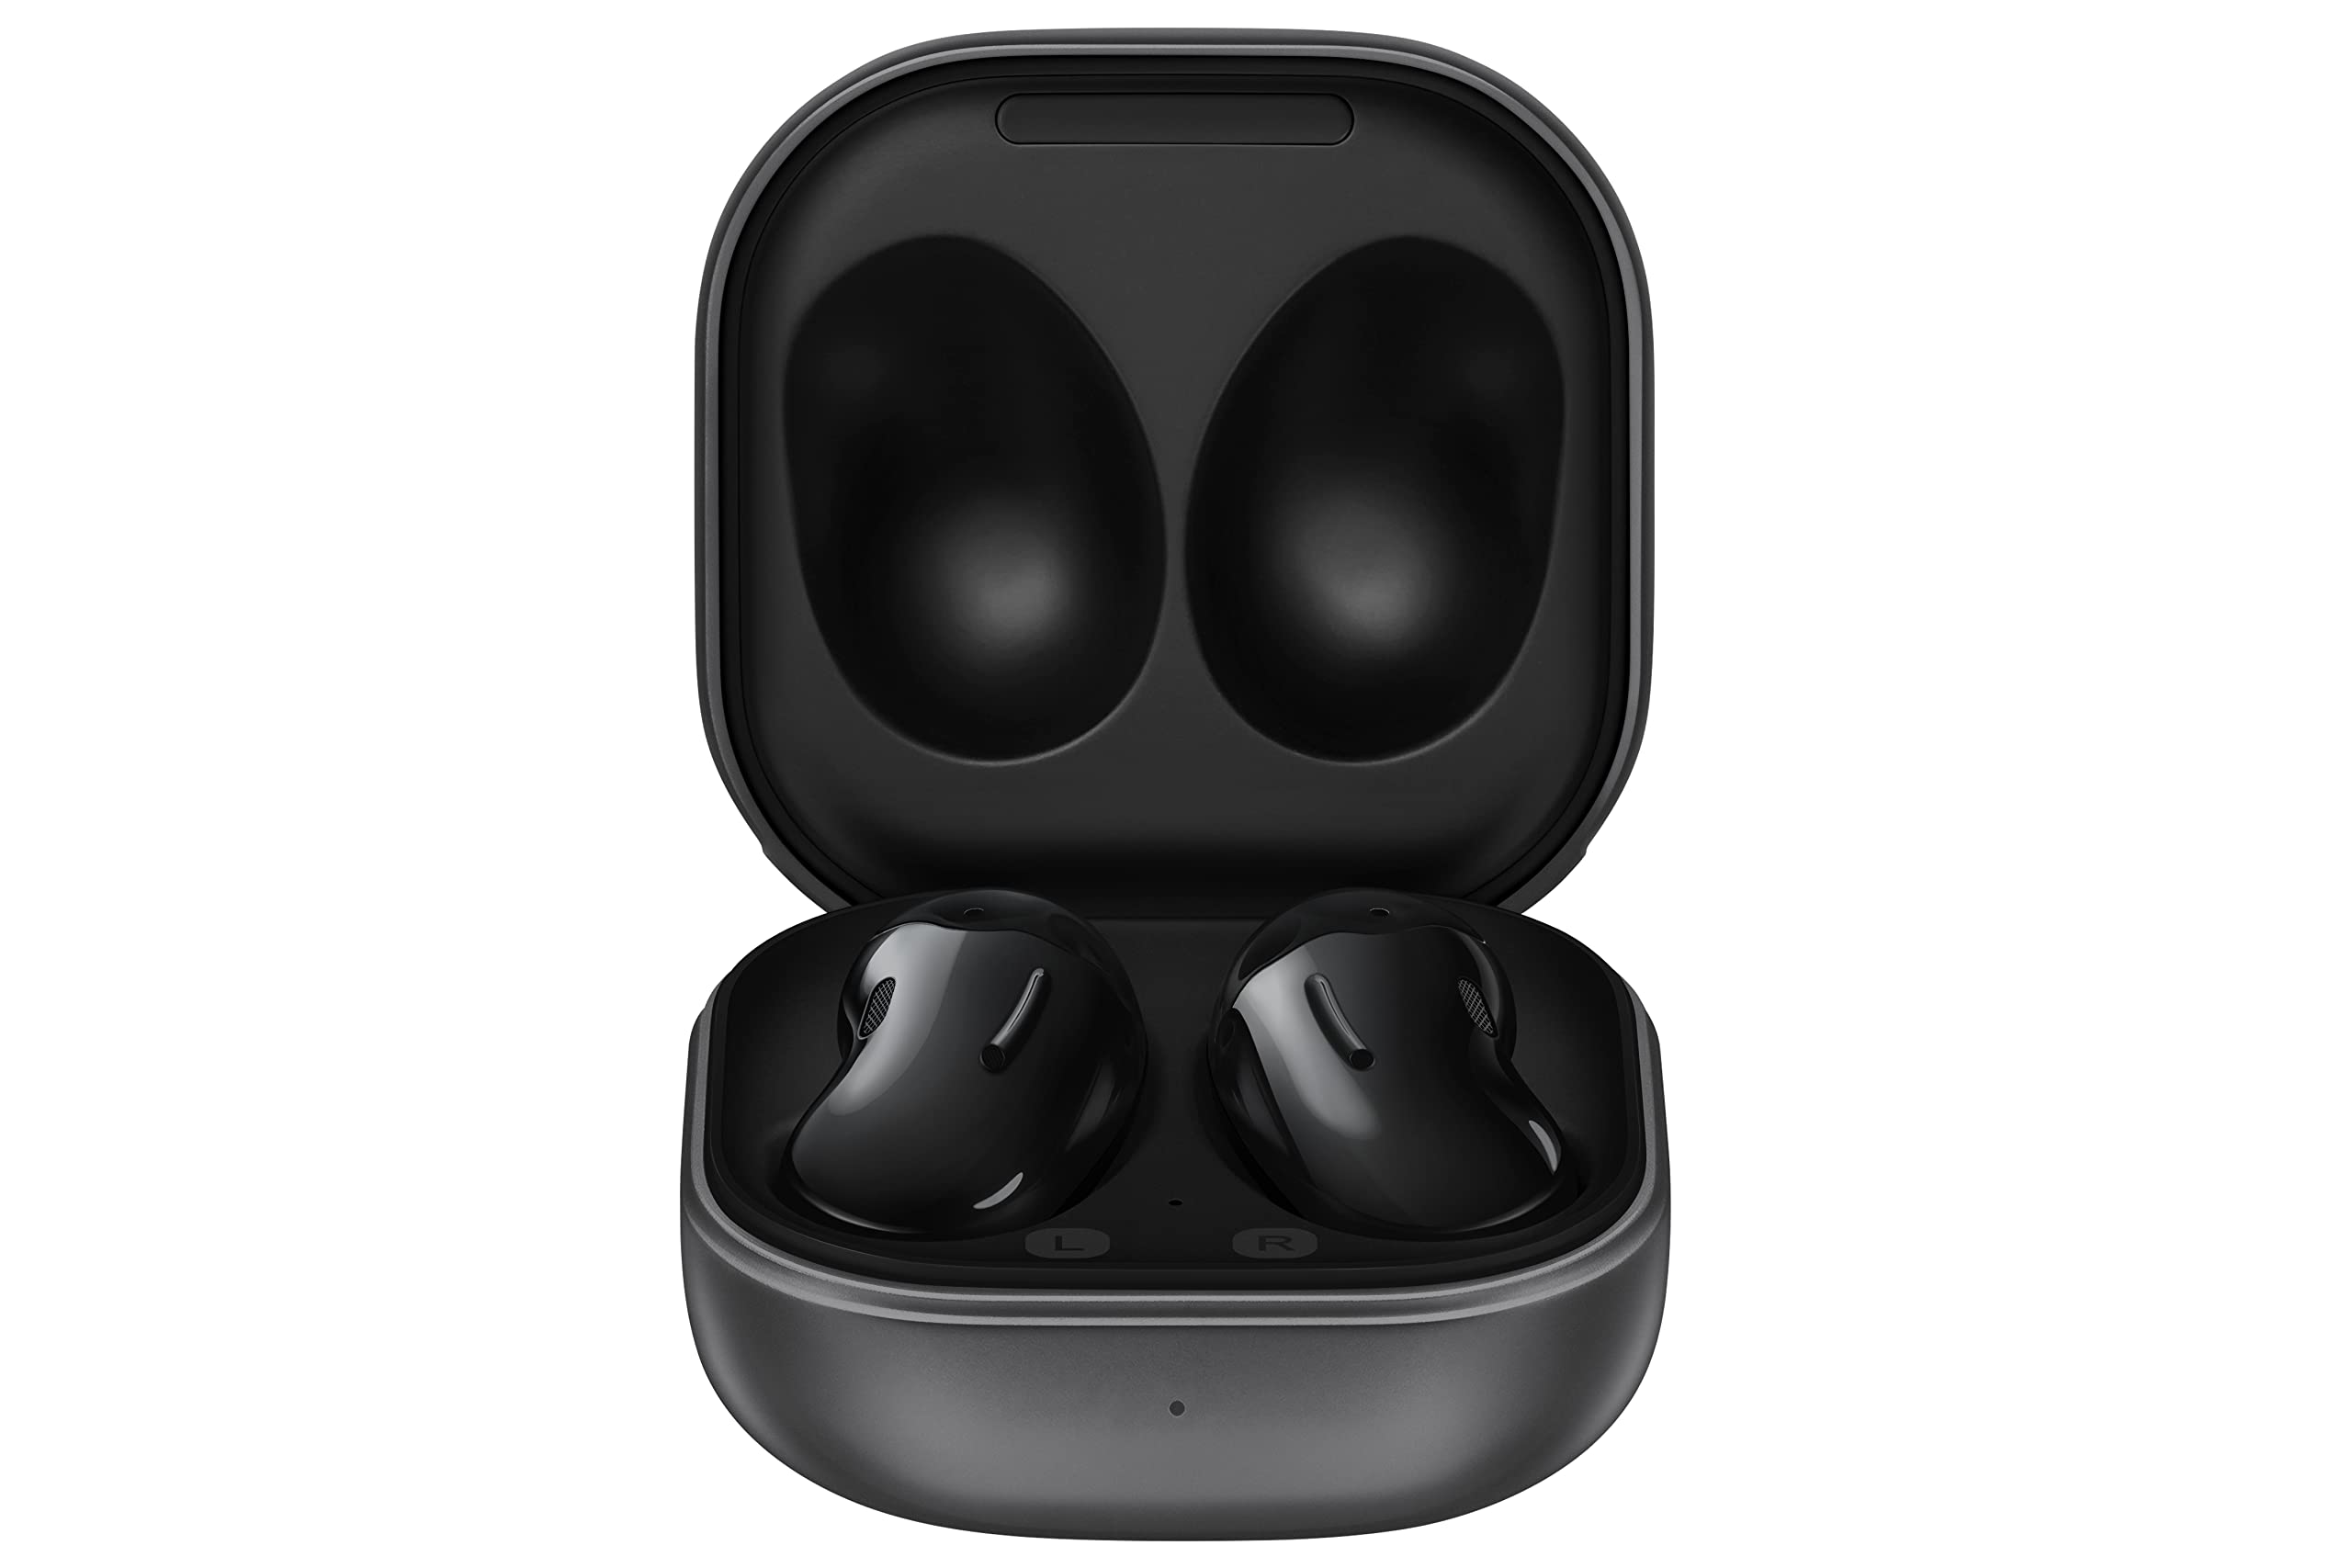 Samsung Galaxy Buds Live, True Wireless Earbuds with Active Noise Cancelling, Microphone, Charging Case for Ear Buds, US Version, Onyx Black